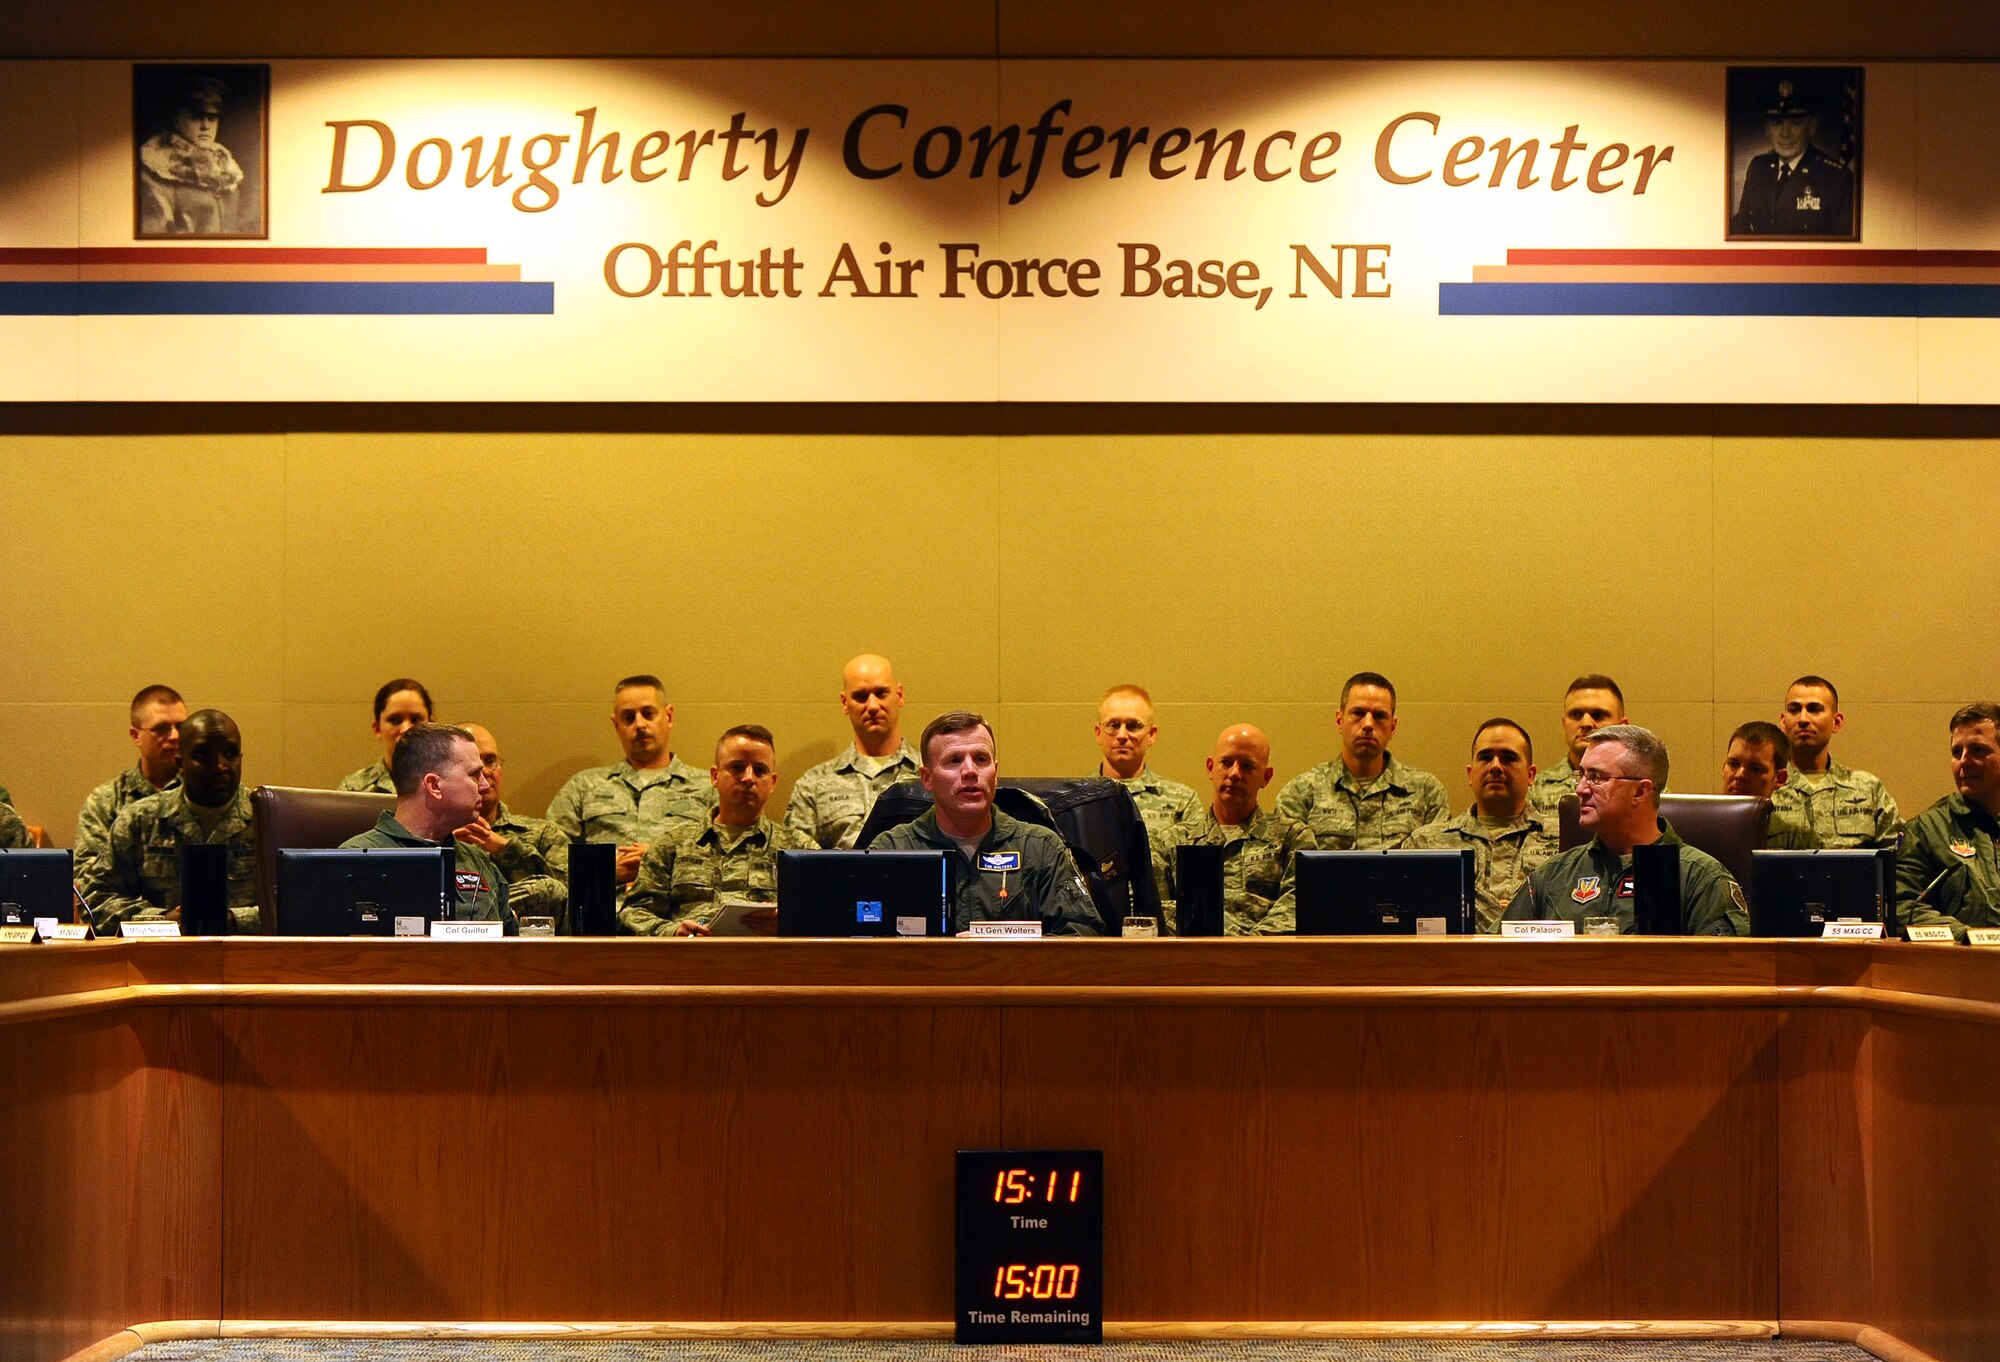 U.S. Air Force Lt. Gen. Tod D. Wolters, 12th Air Force (AFSOUTH) commander, greets the 55th Wing’s leadership in the Dougherty Conference Center Jan. 8 at Offutt Air Force Base, Neb.   This marks the first visit by Wolters to Offutt following his assumption of command in September.  (U.S. Air Force photo by Josh Plueger/Released)